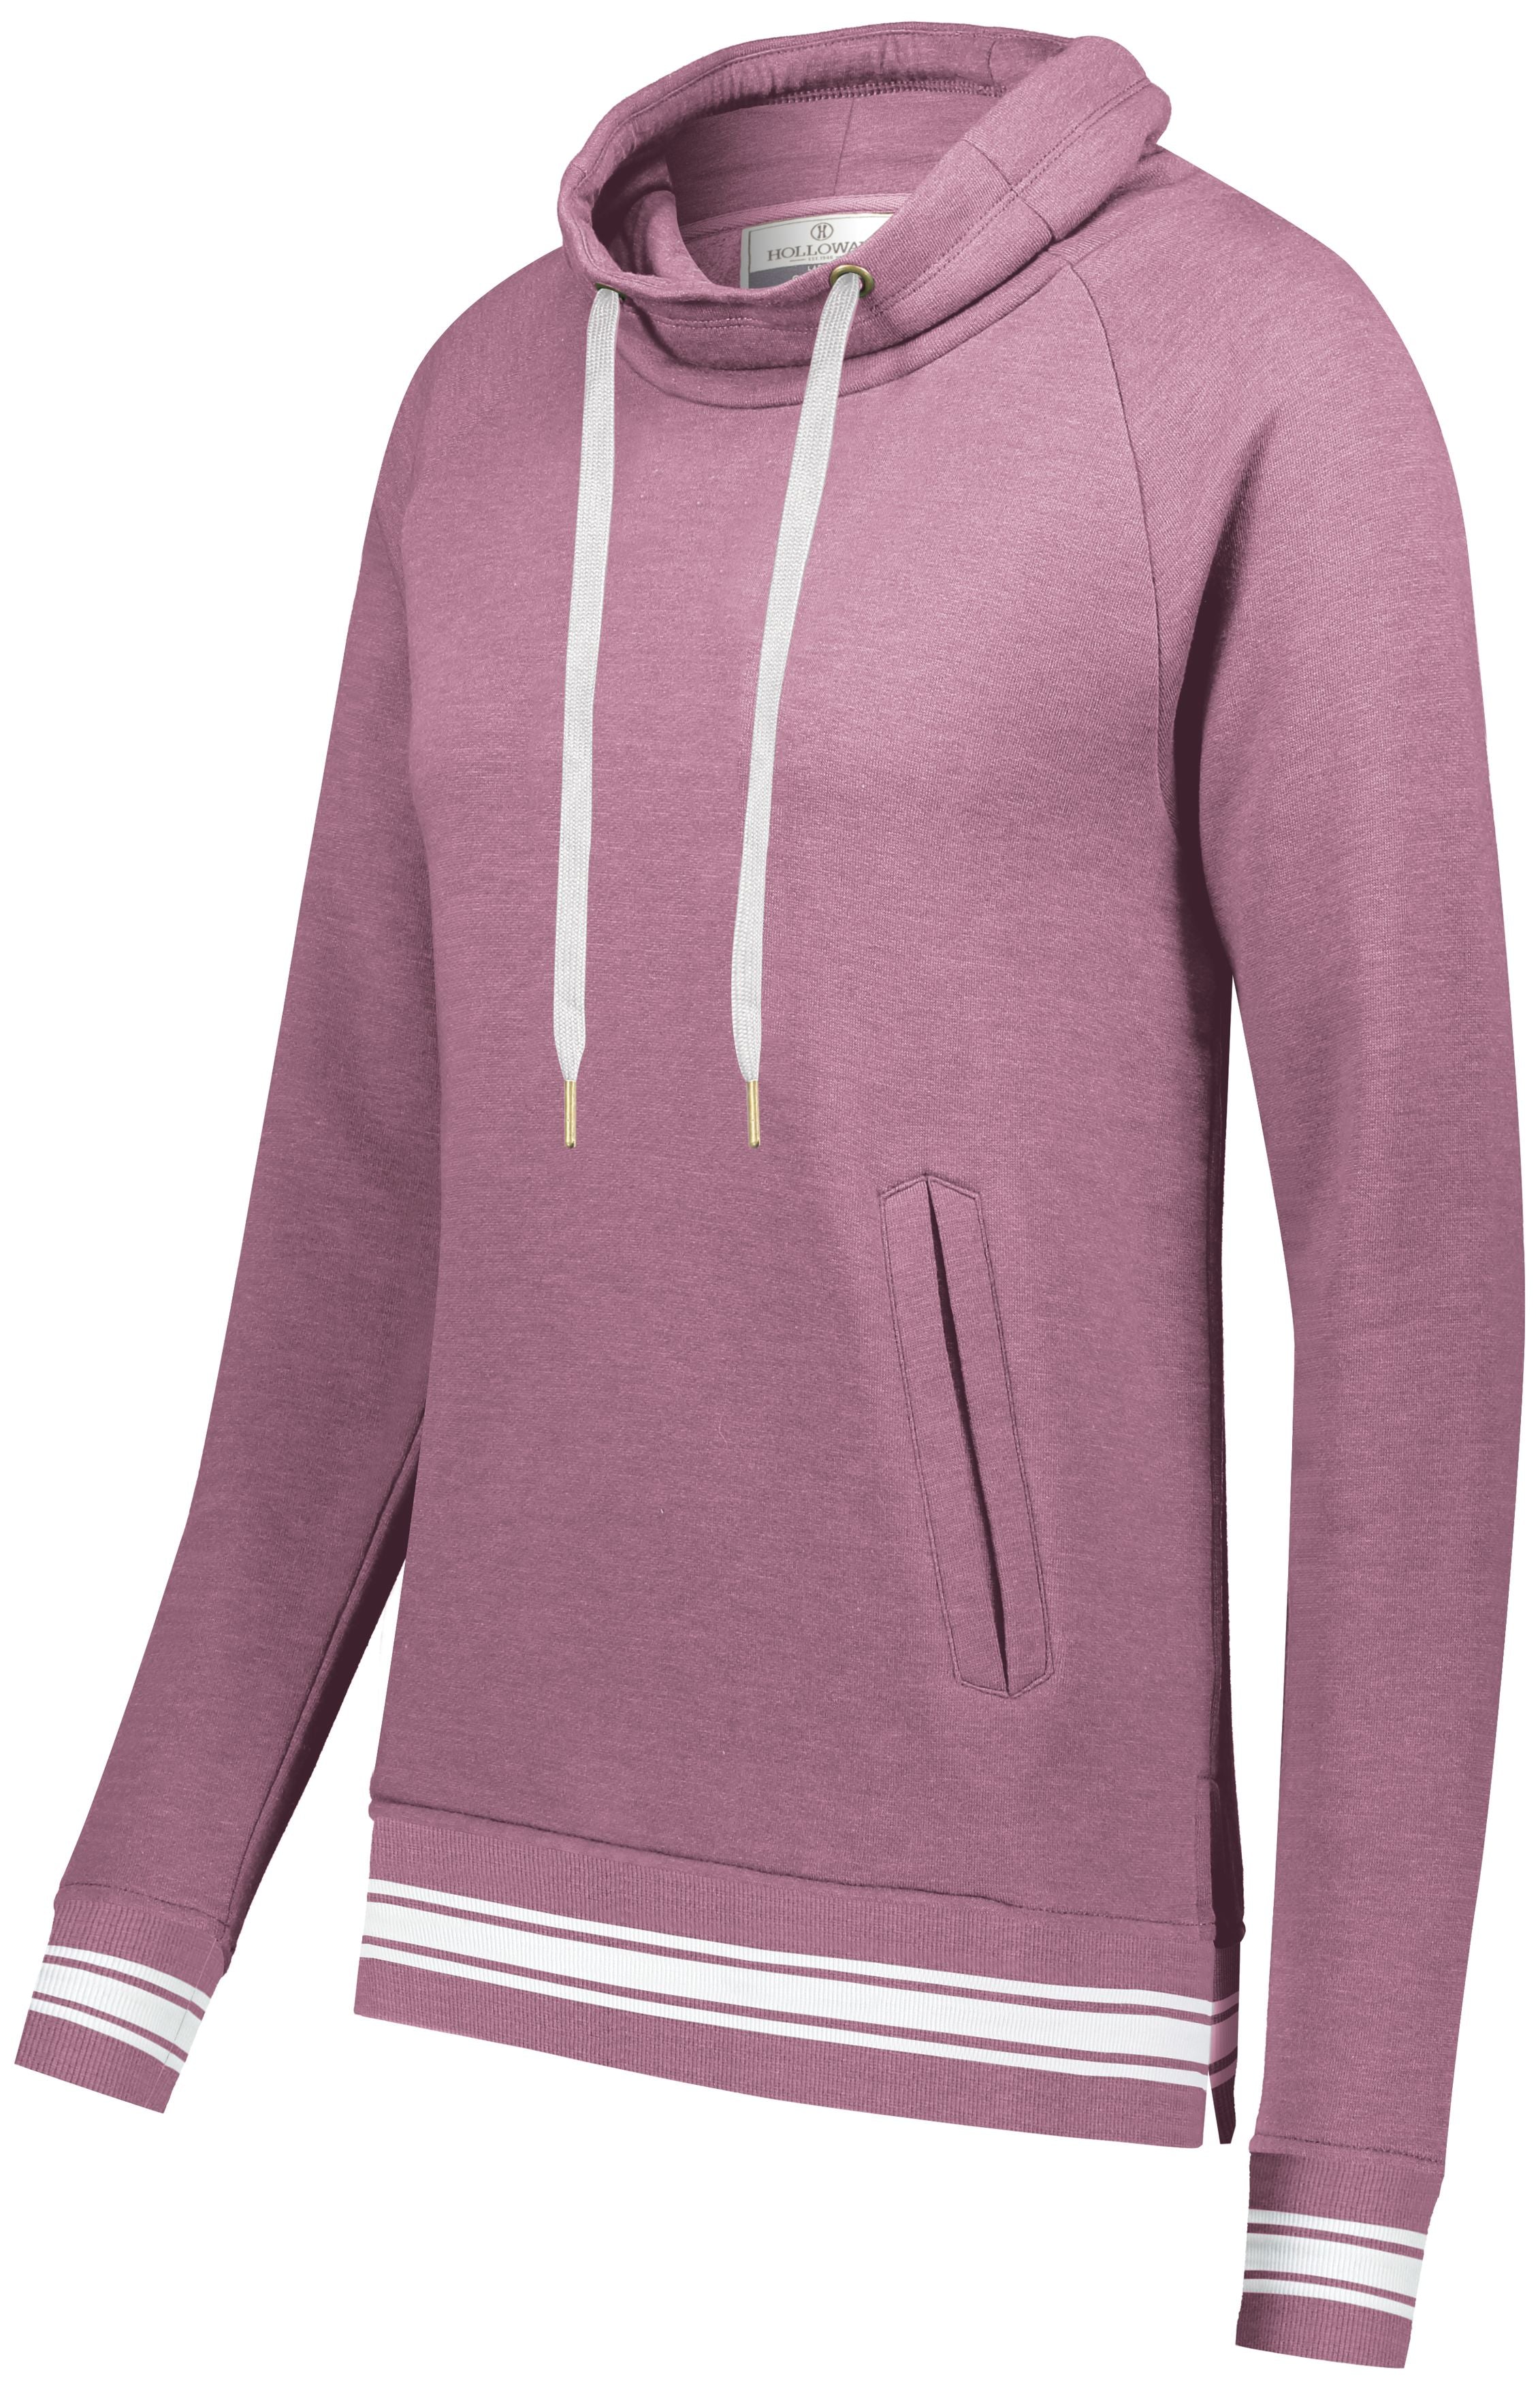 Holloway Ladies Ivy League Funnel Neck Pullover